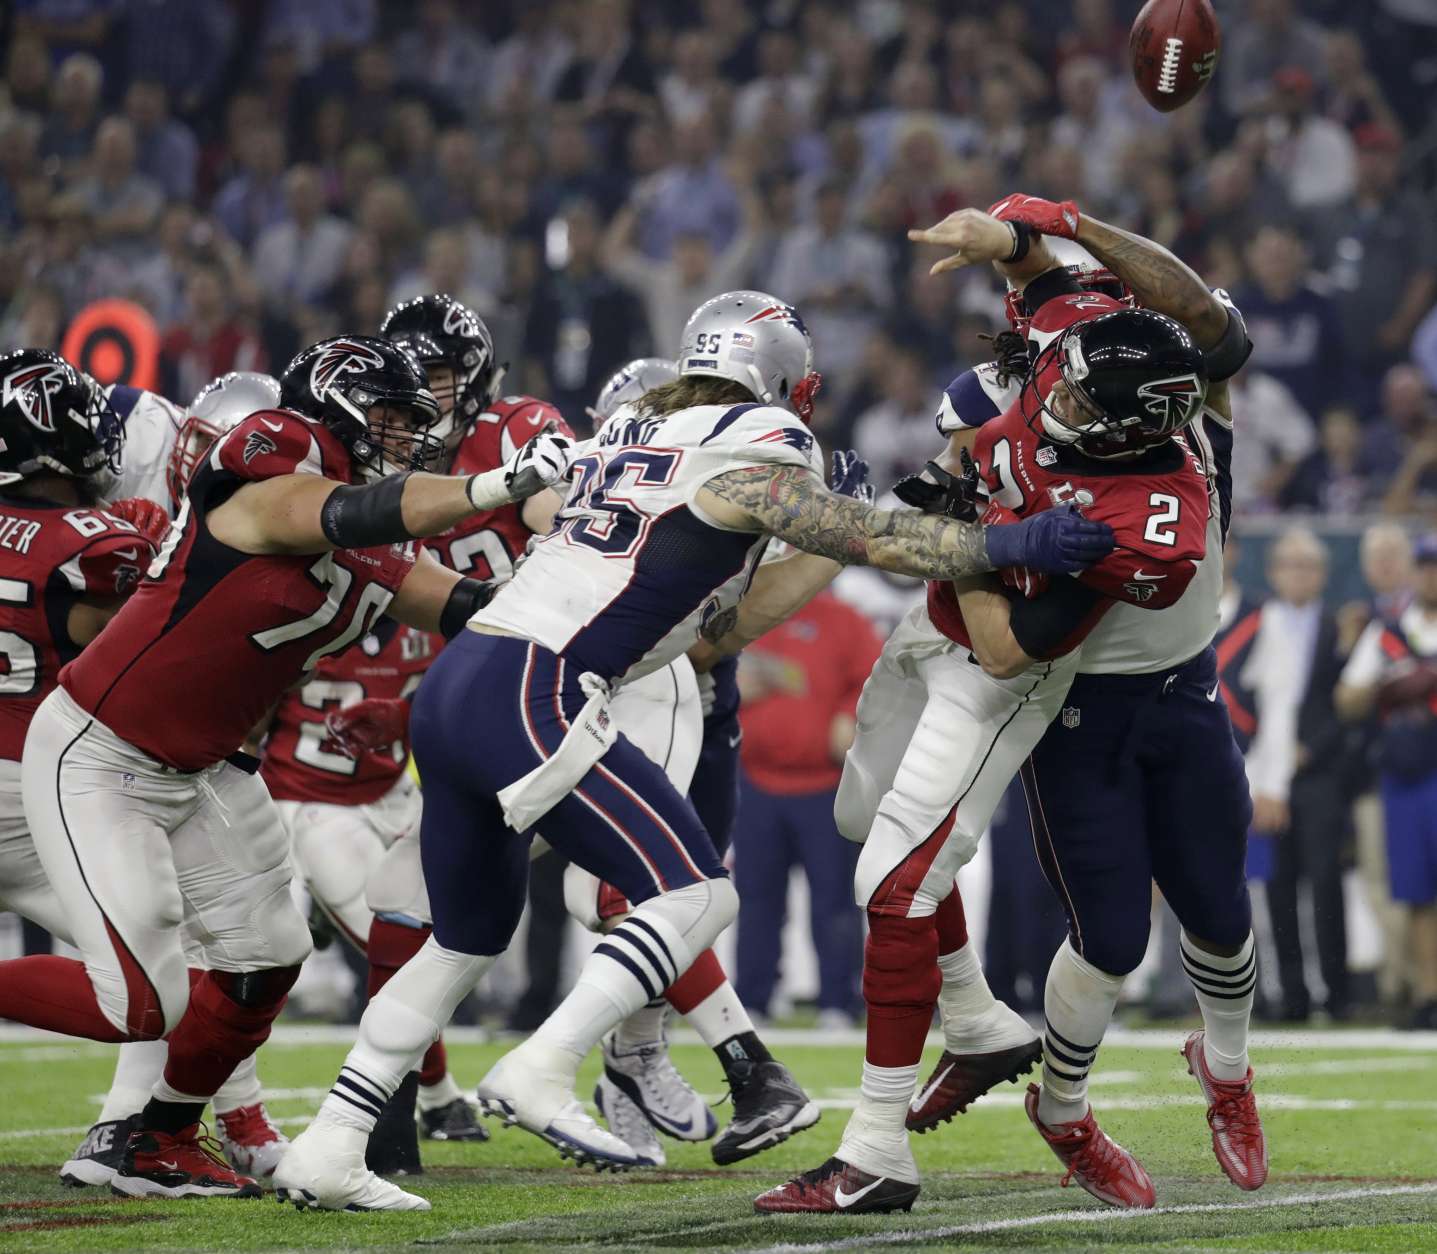 Atlanta Falcons' Matt Ryan (2) fumbles as he is hit by New England Patriots' Dont'a Hightower, obscured at rear, during the second half of the NFL Super Bowl 51 football game Sunday, Feb. 5, 2017, in Houston. (AP Photo/Eric Gay)